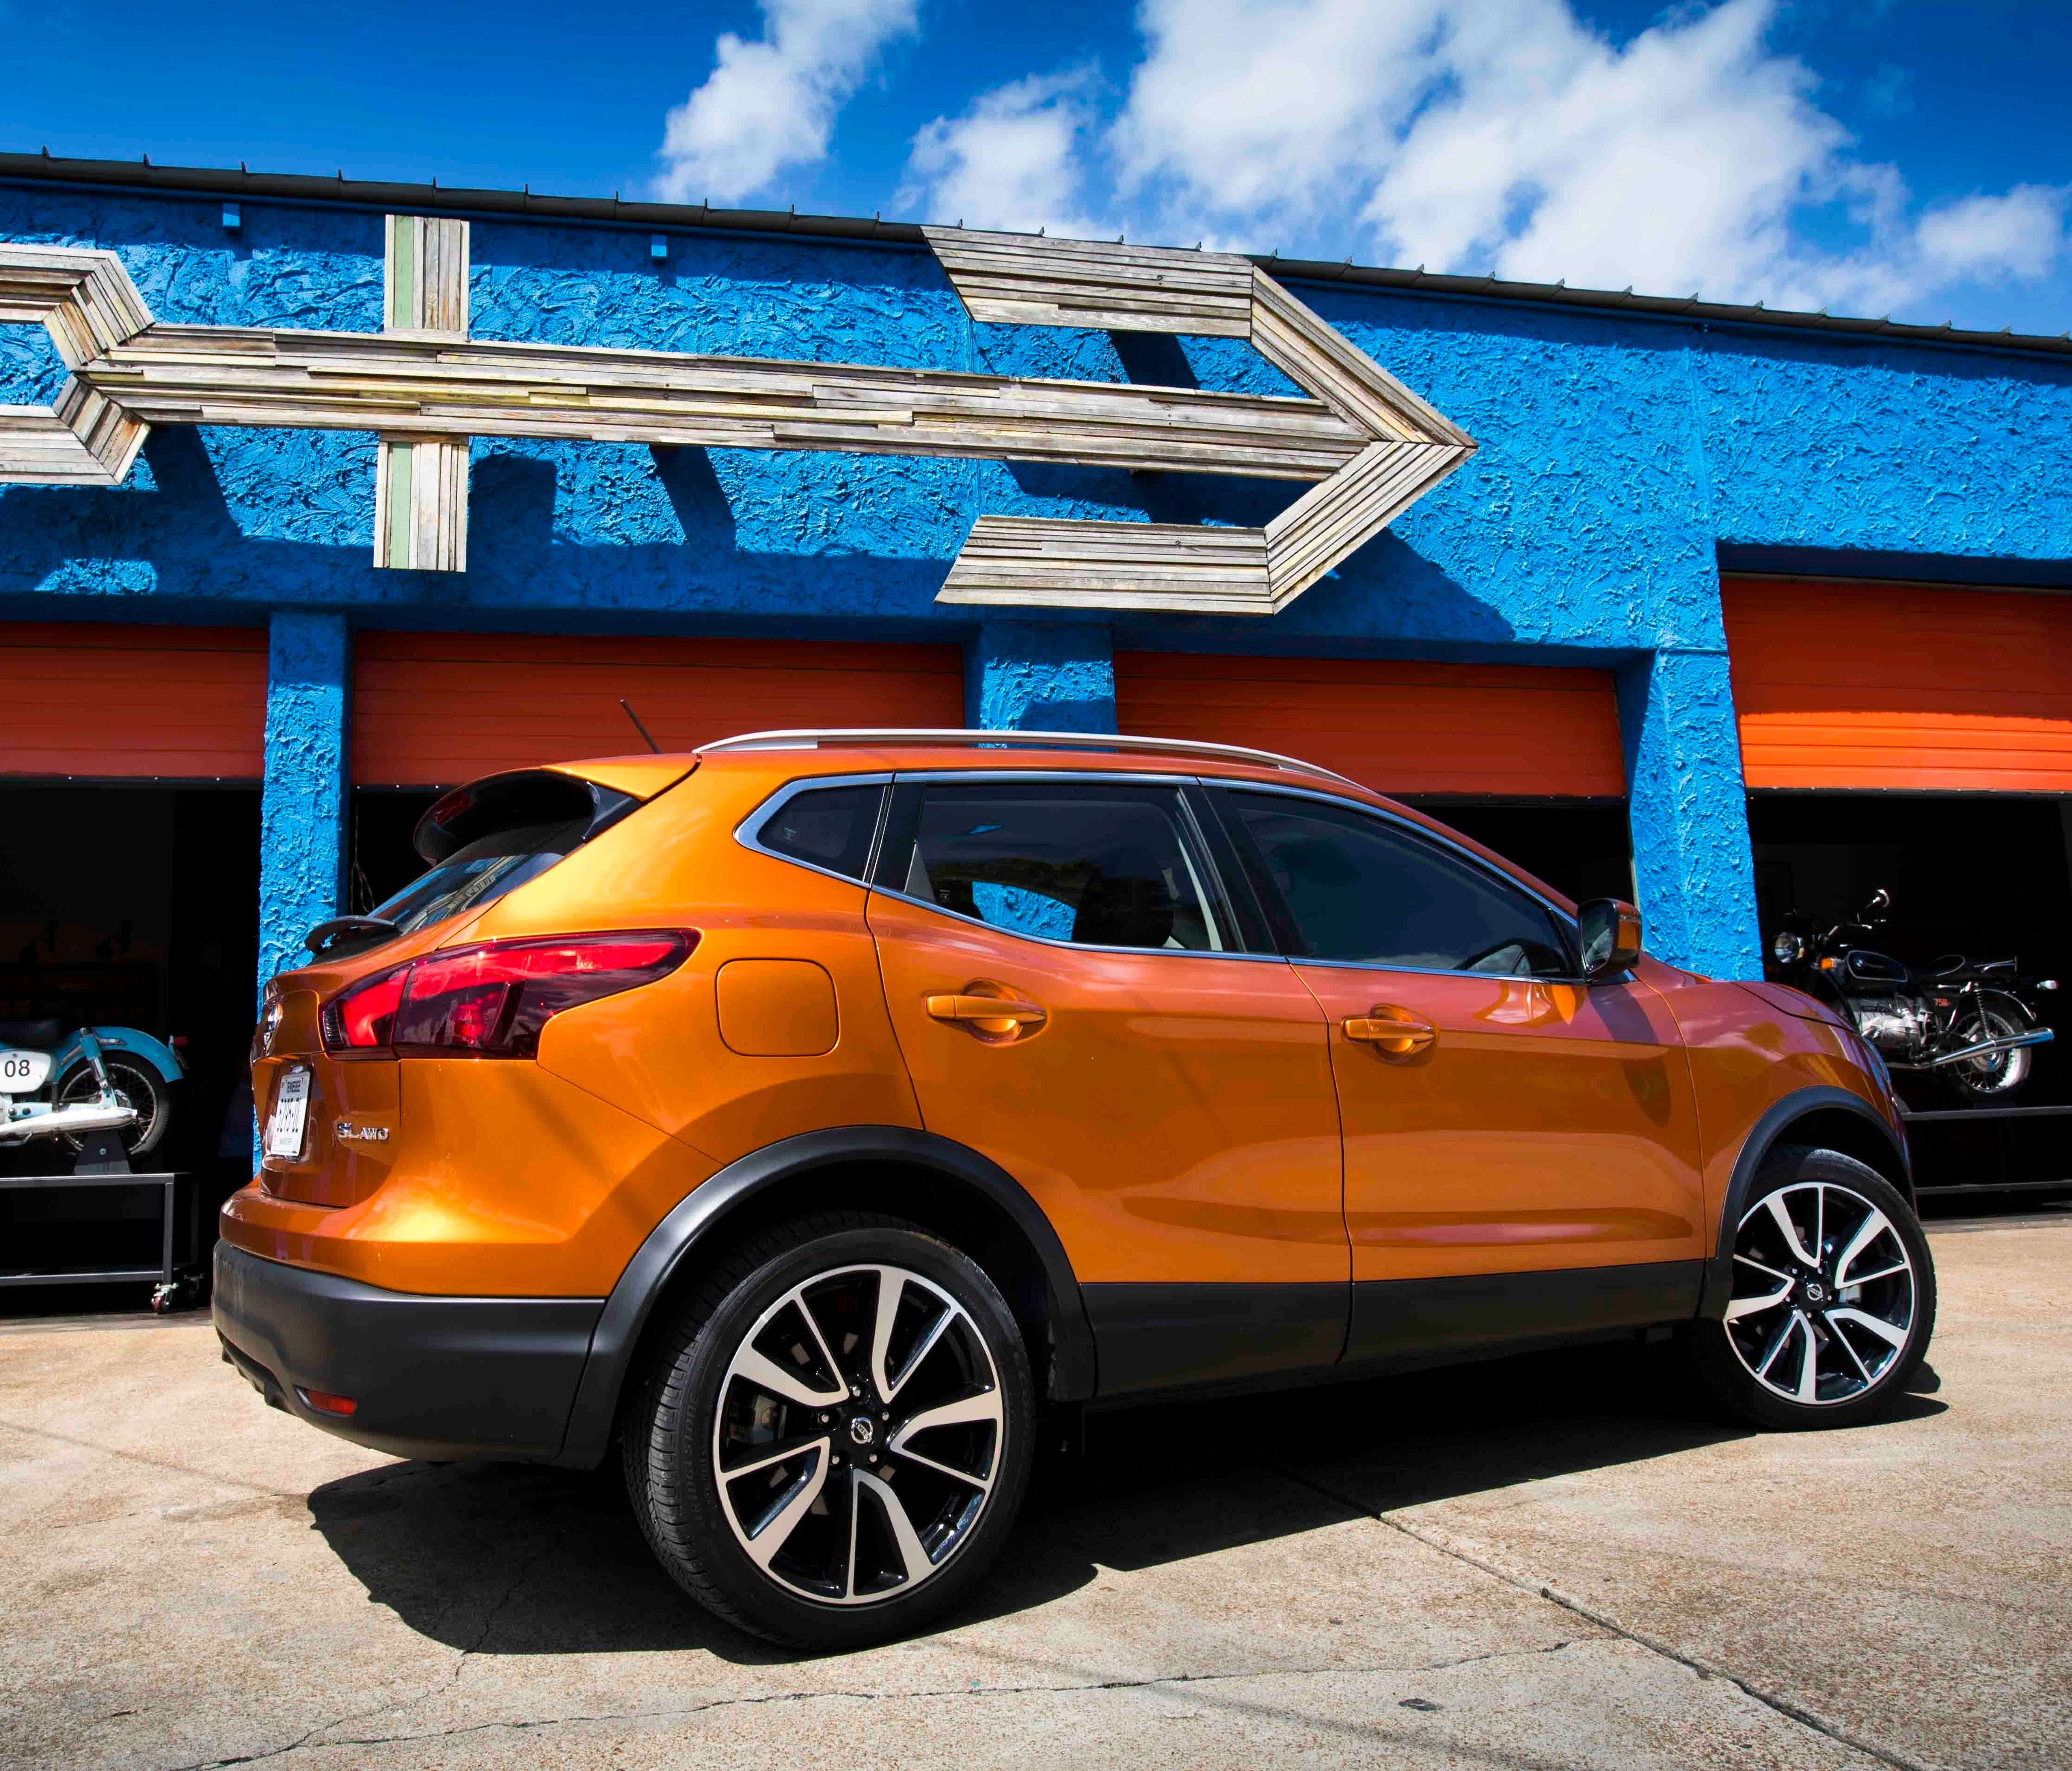 Slightly smaller than the Rogue, the new 2017 Nissan Rogue Sport is coming to dealers